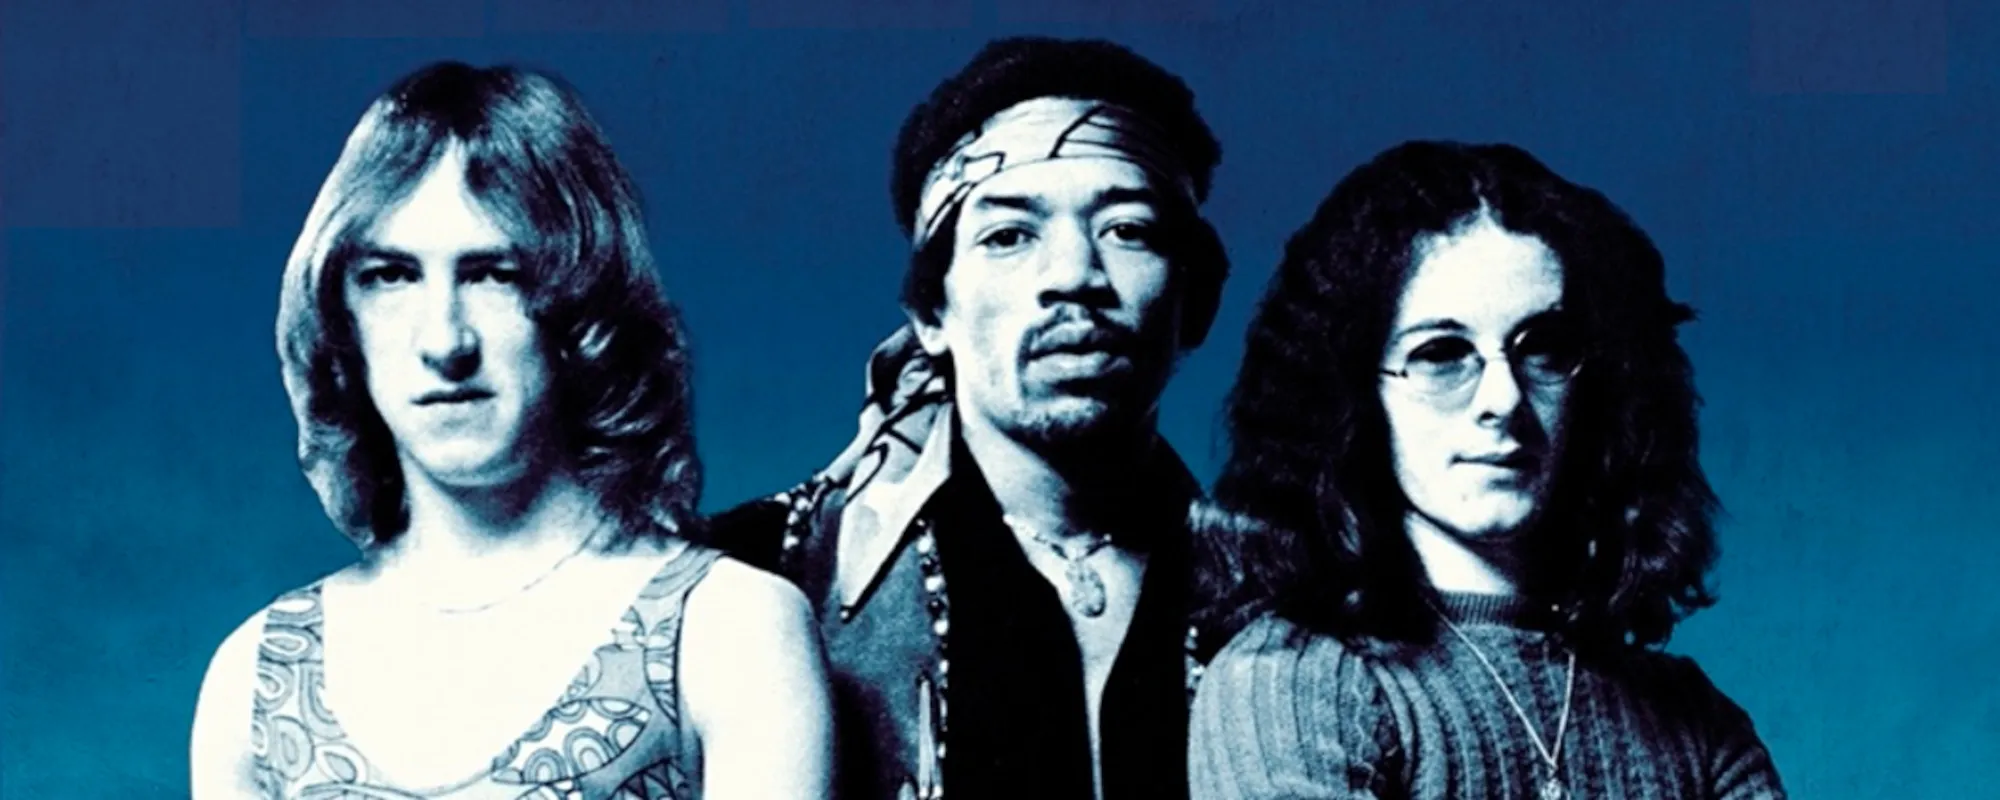 Listen to Jimi Hendrix Experience’s Live 1967 Cover of “Sgt. Pepper’s Lonely Hearts Club Band”